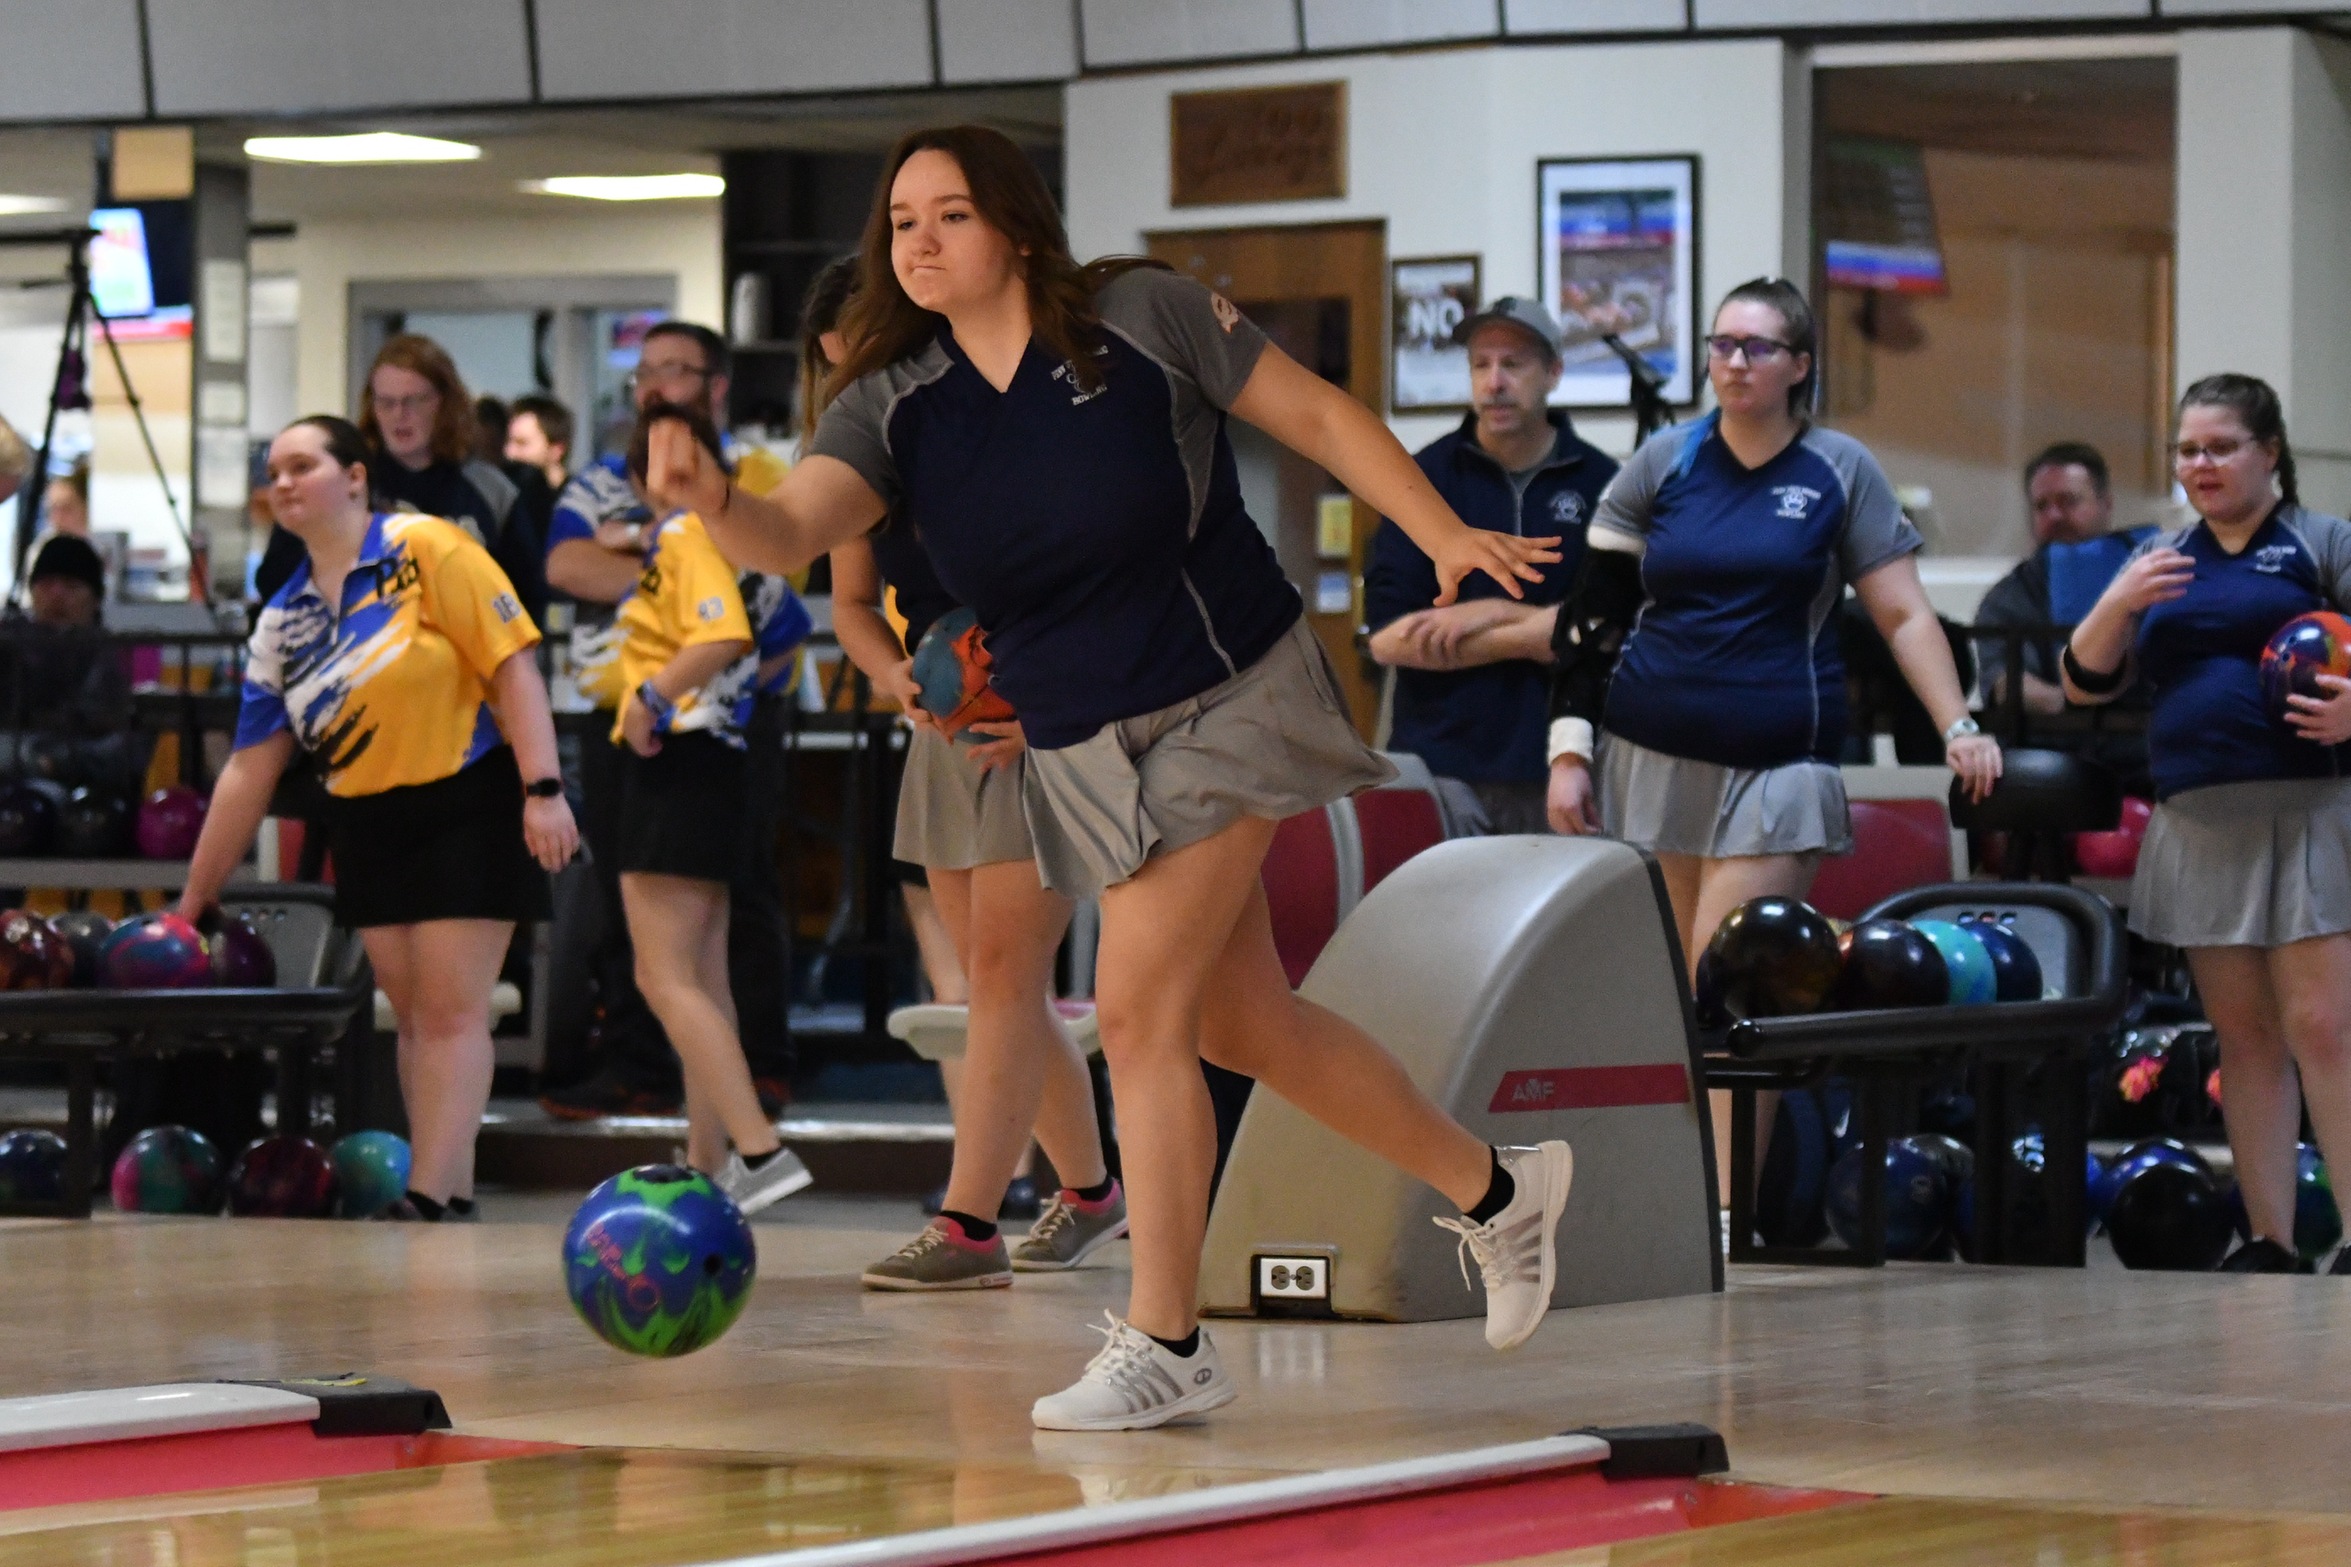 Women's Bowling Takes Second Place at Grapevine Classic